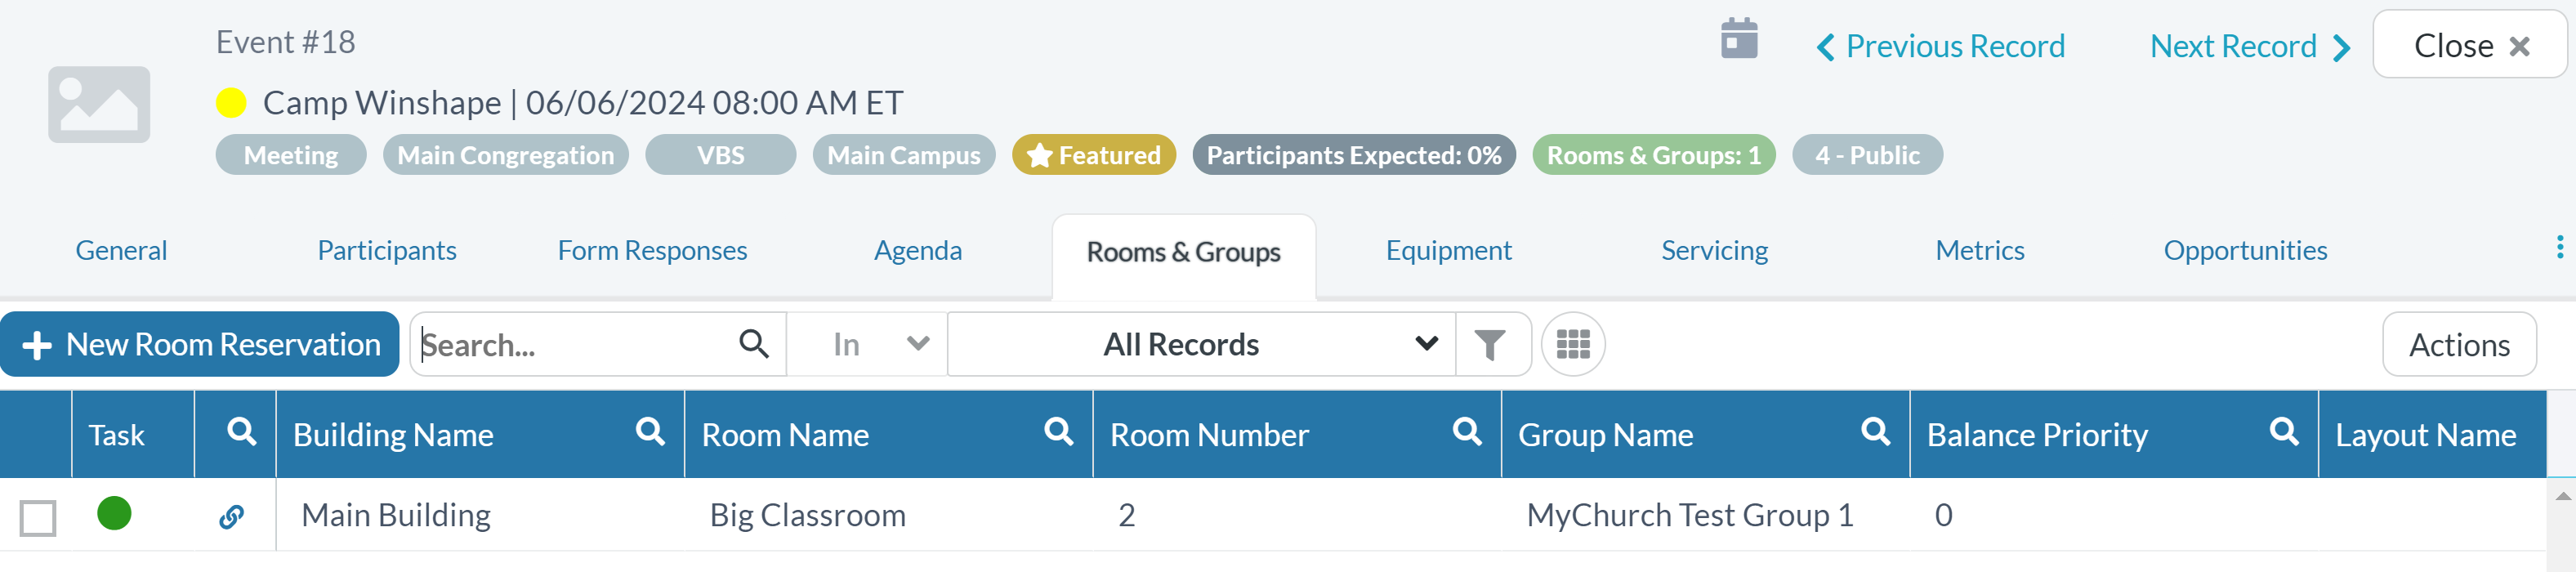 Image displaying an example event's Rooms & Groups tab.